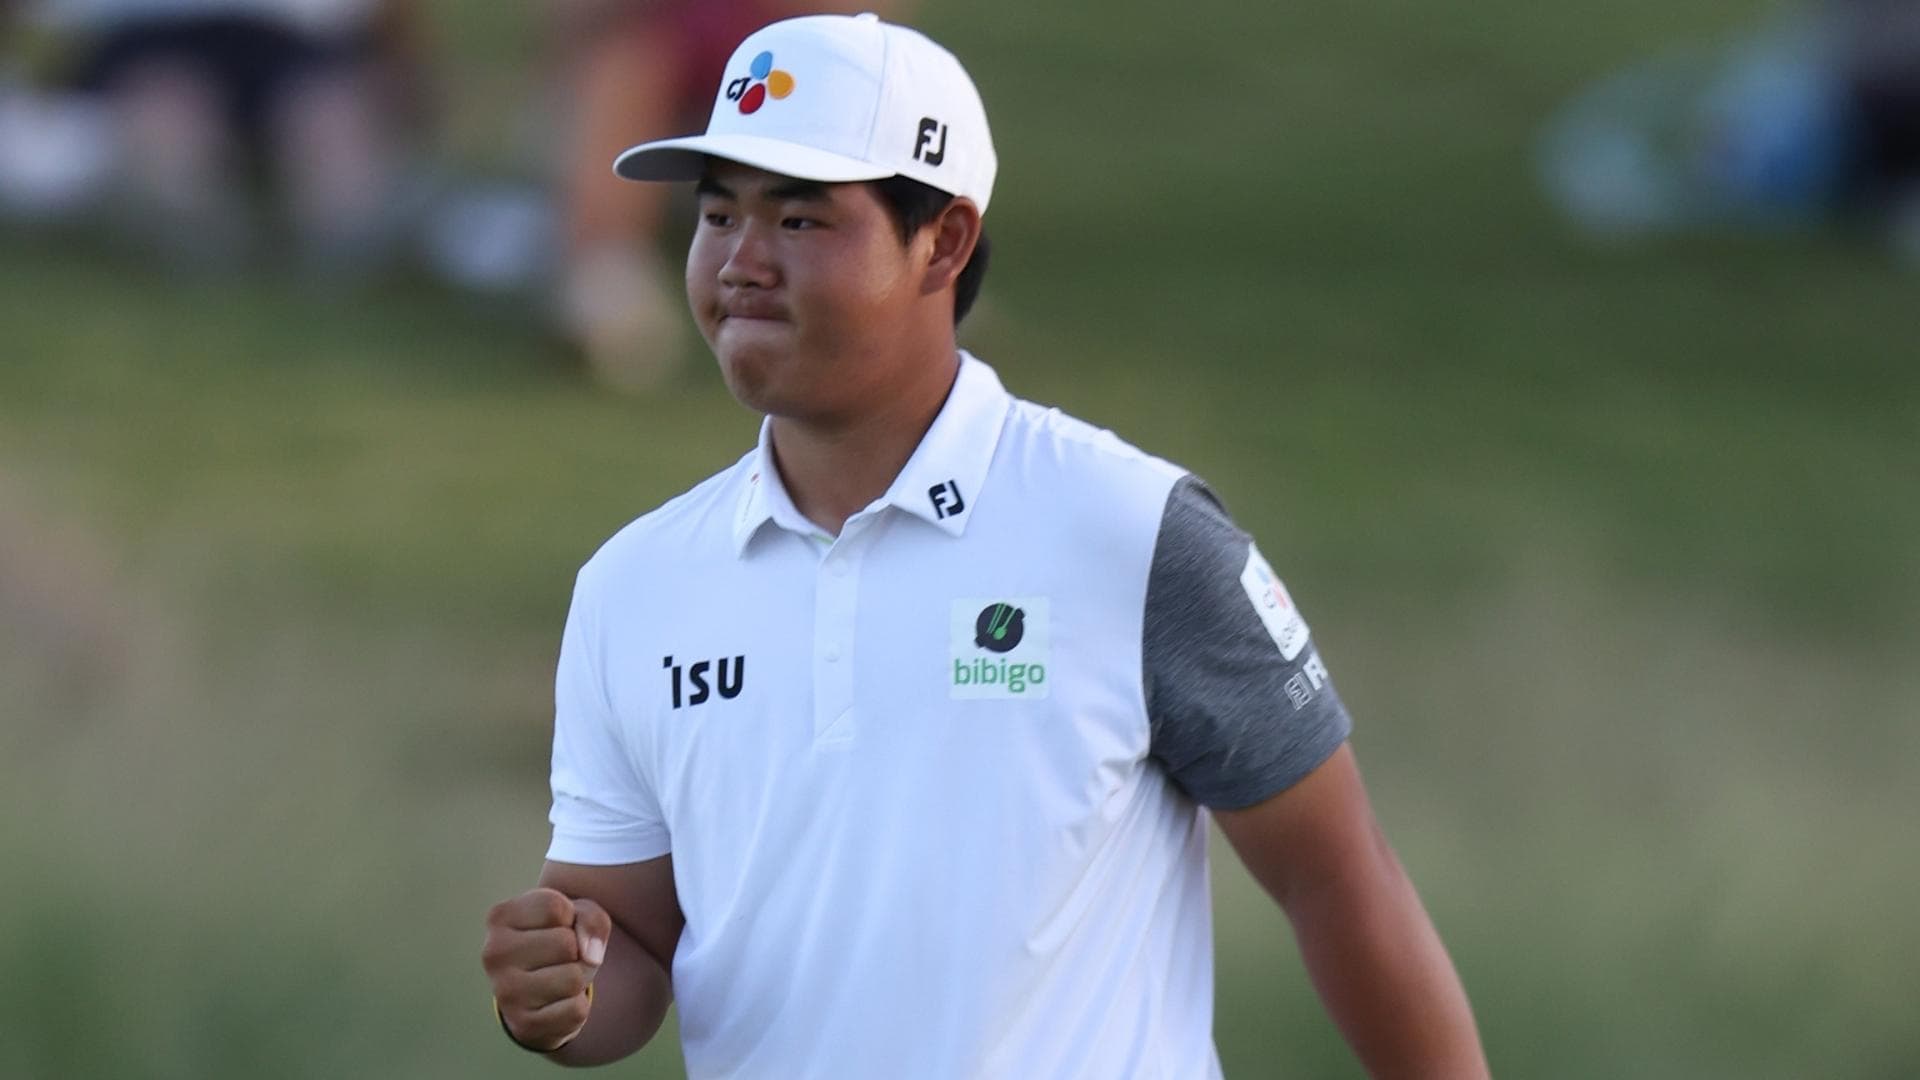 Fresh off win, Tom Kim returns to Asia for first tourney in Japan